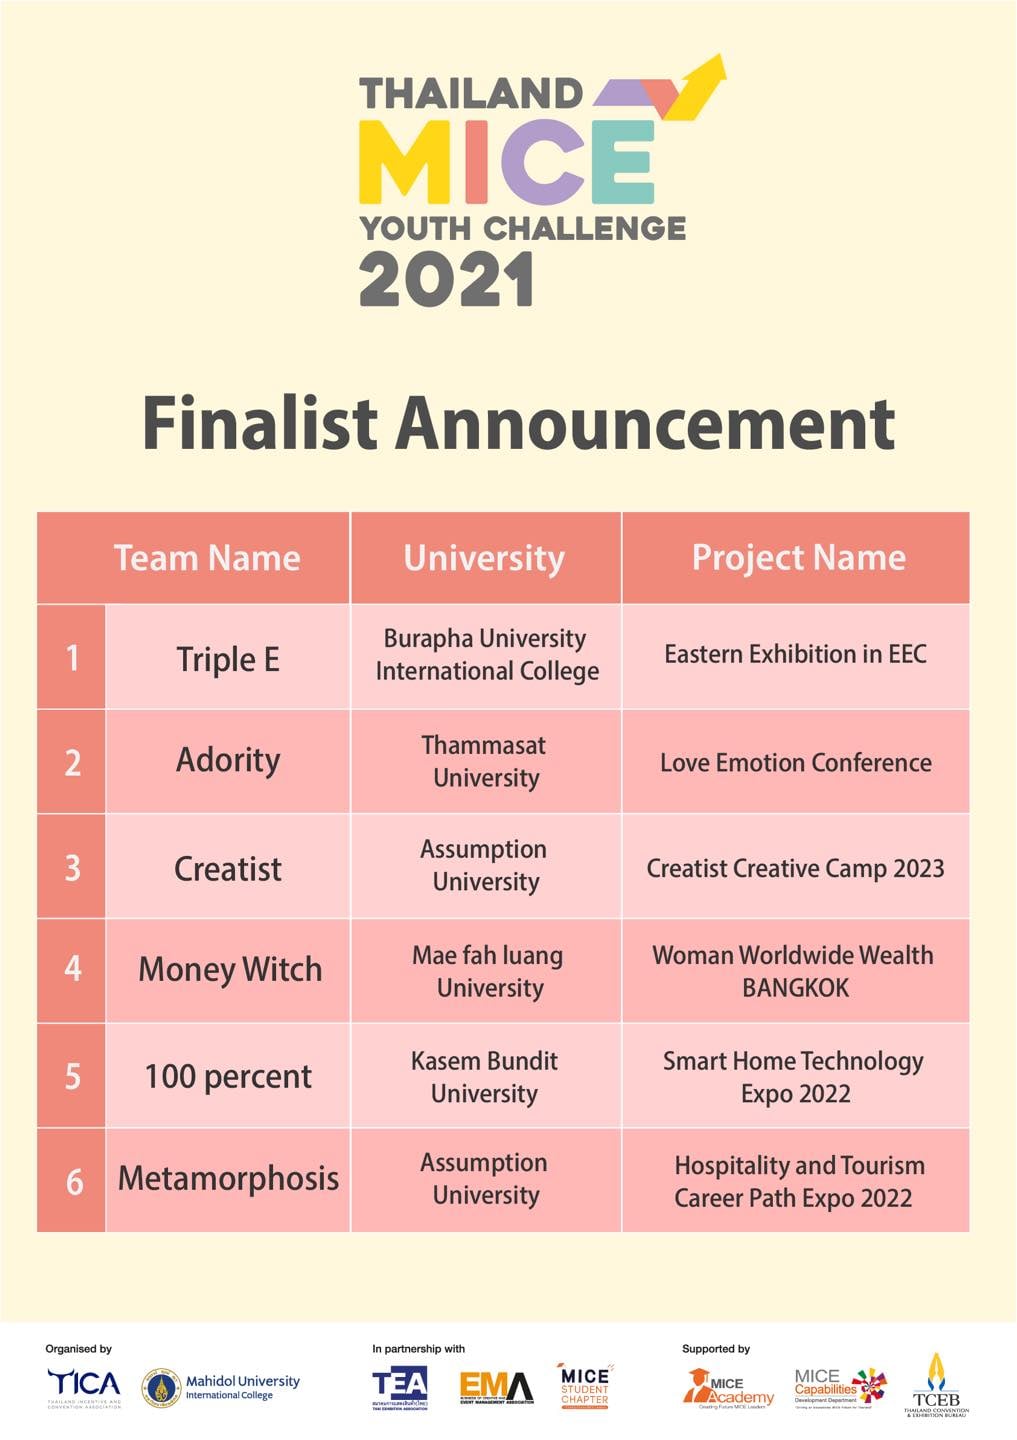 The Finalist of Thailand MICE Youth Challenge 2021